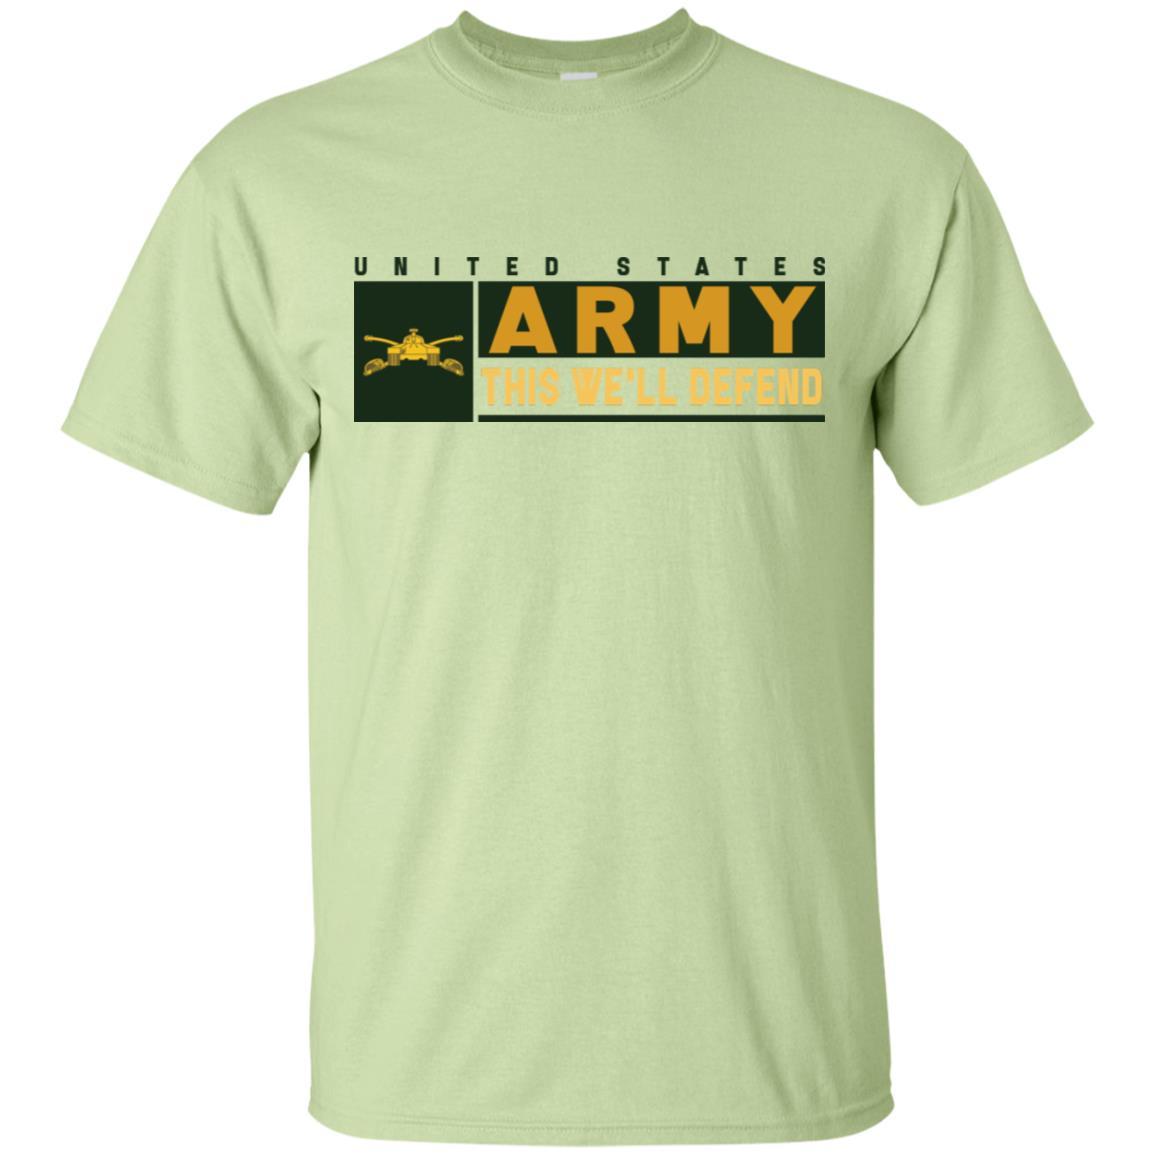 U.S Army Armor Branch- This We'll Defend T-Shirt On Front For Men-TShirt-Army-Veterans Nation